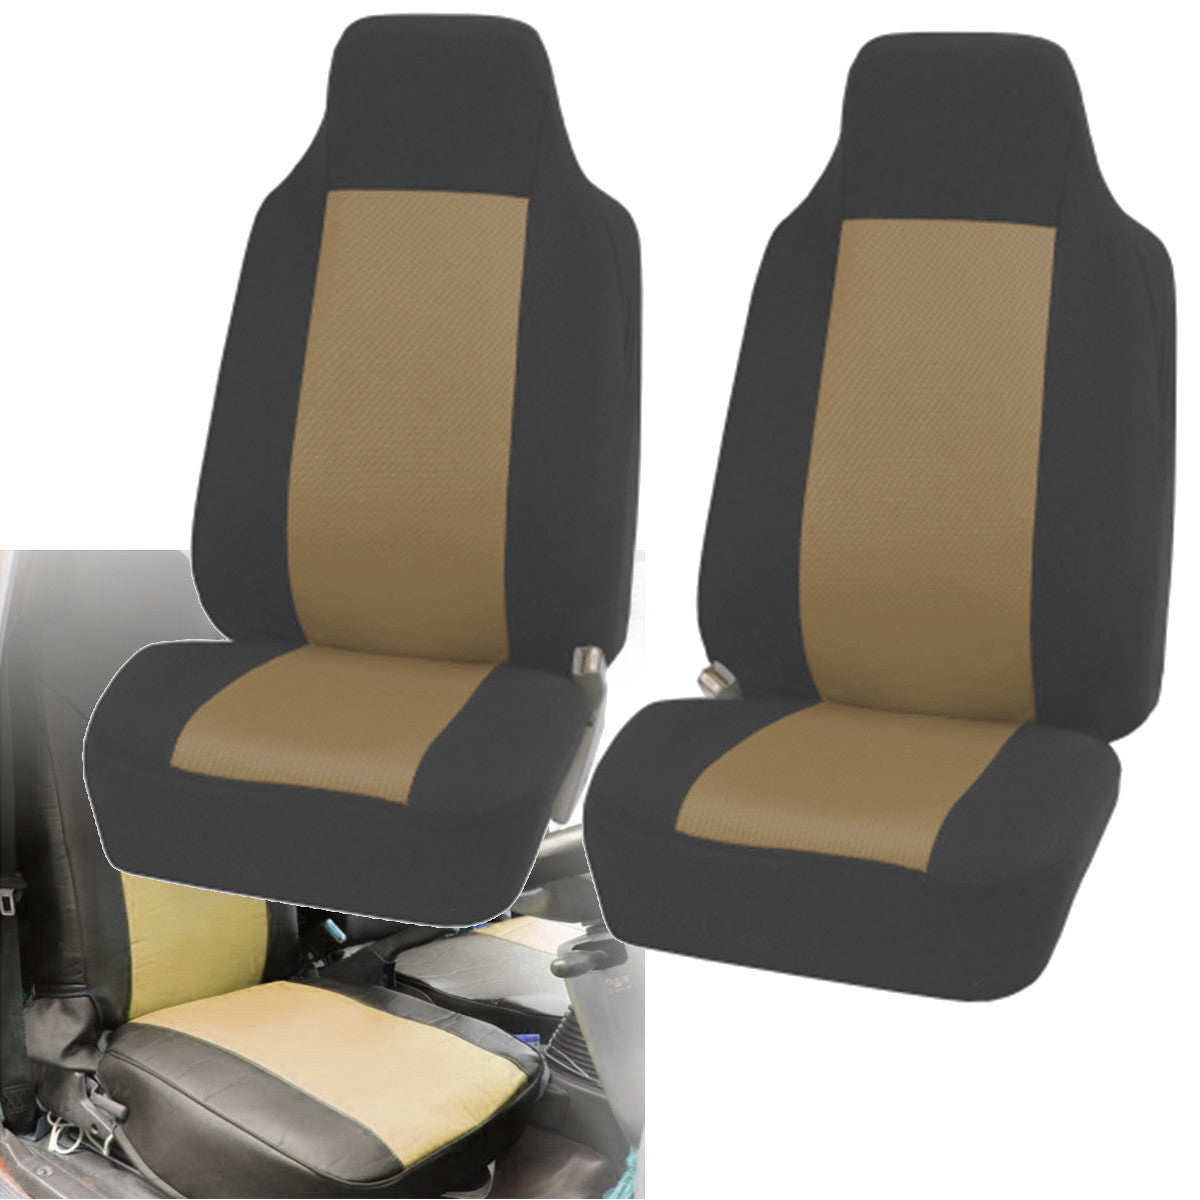 Universal High-Back Bucket Front Seat Covers Fabric Mesh Style For Car Truck SUV - Auto GoShop